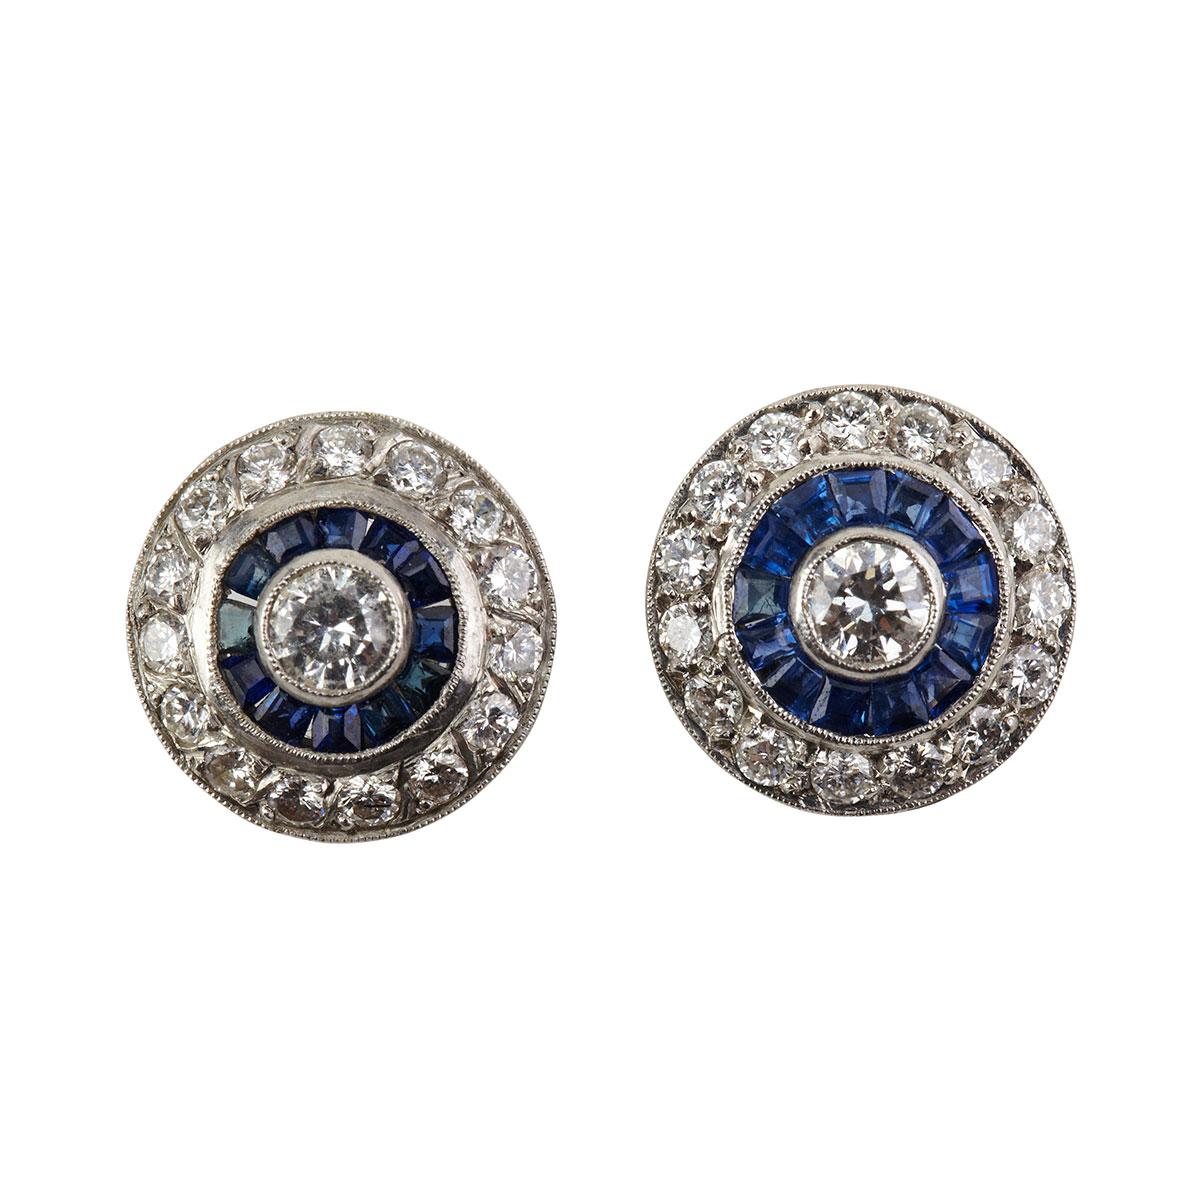 Pair Of Platinum Button Earrings